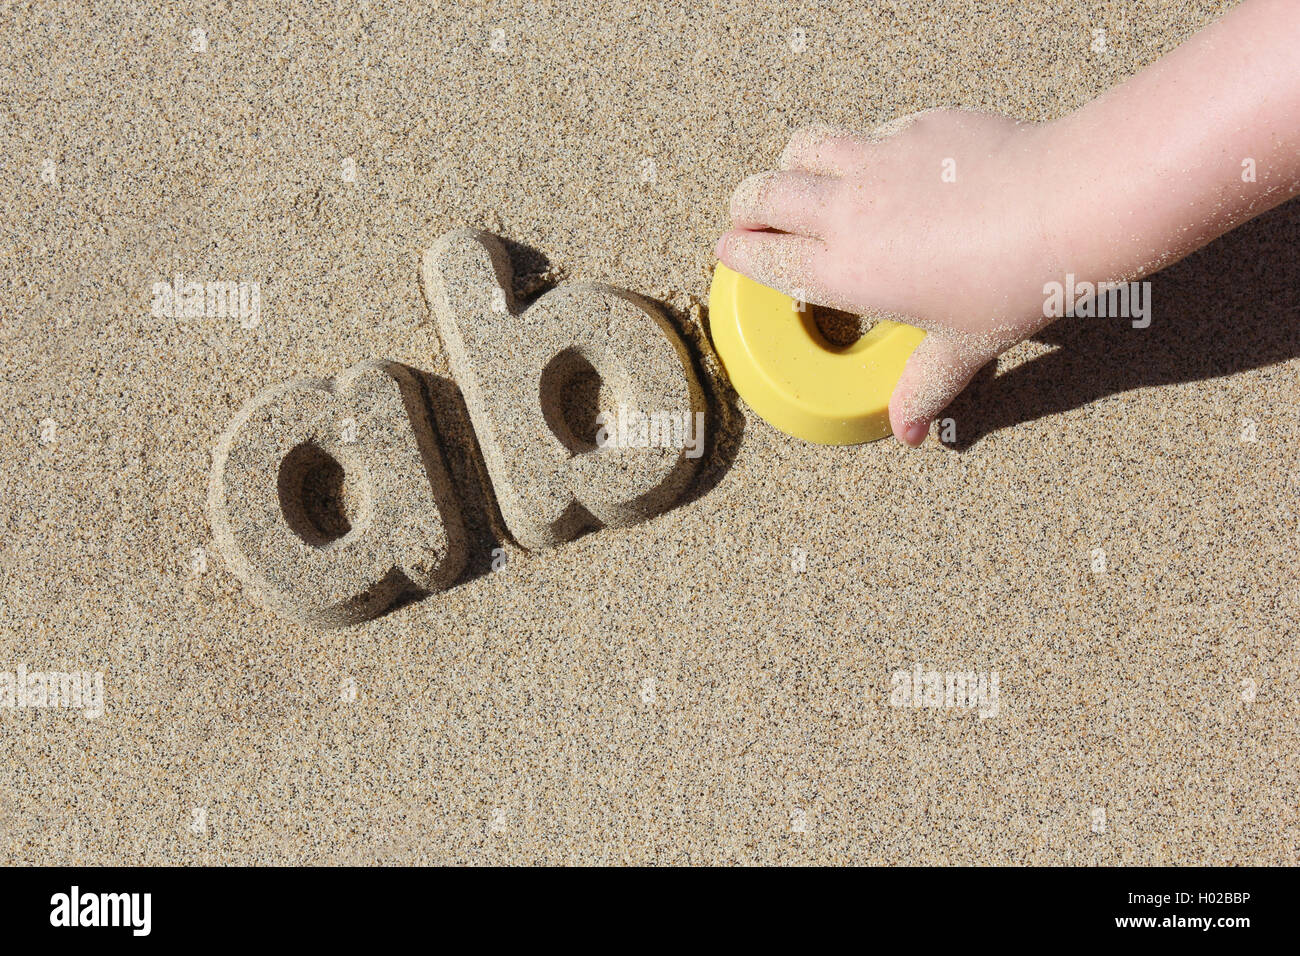 A child playing on beach. The child has made the letters 'abc' in a row. Learning is fun. Stock Photo